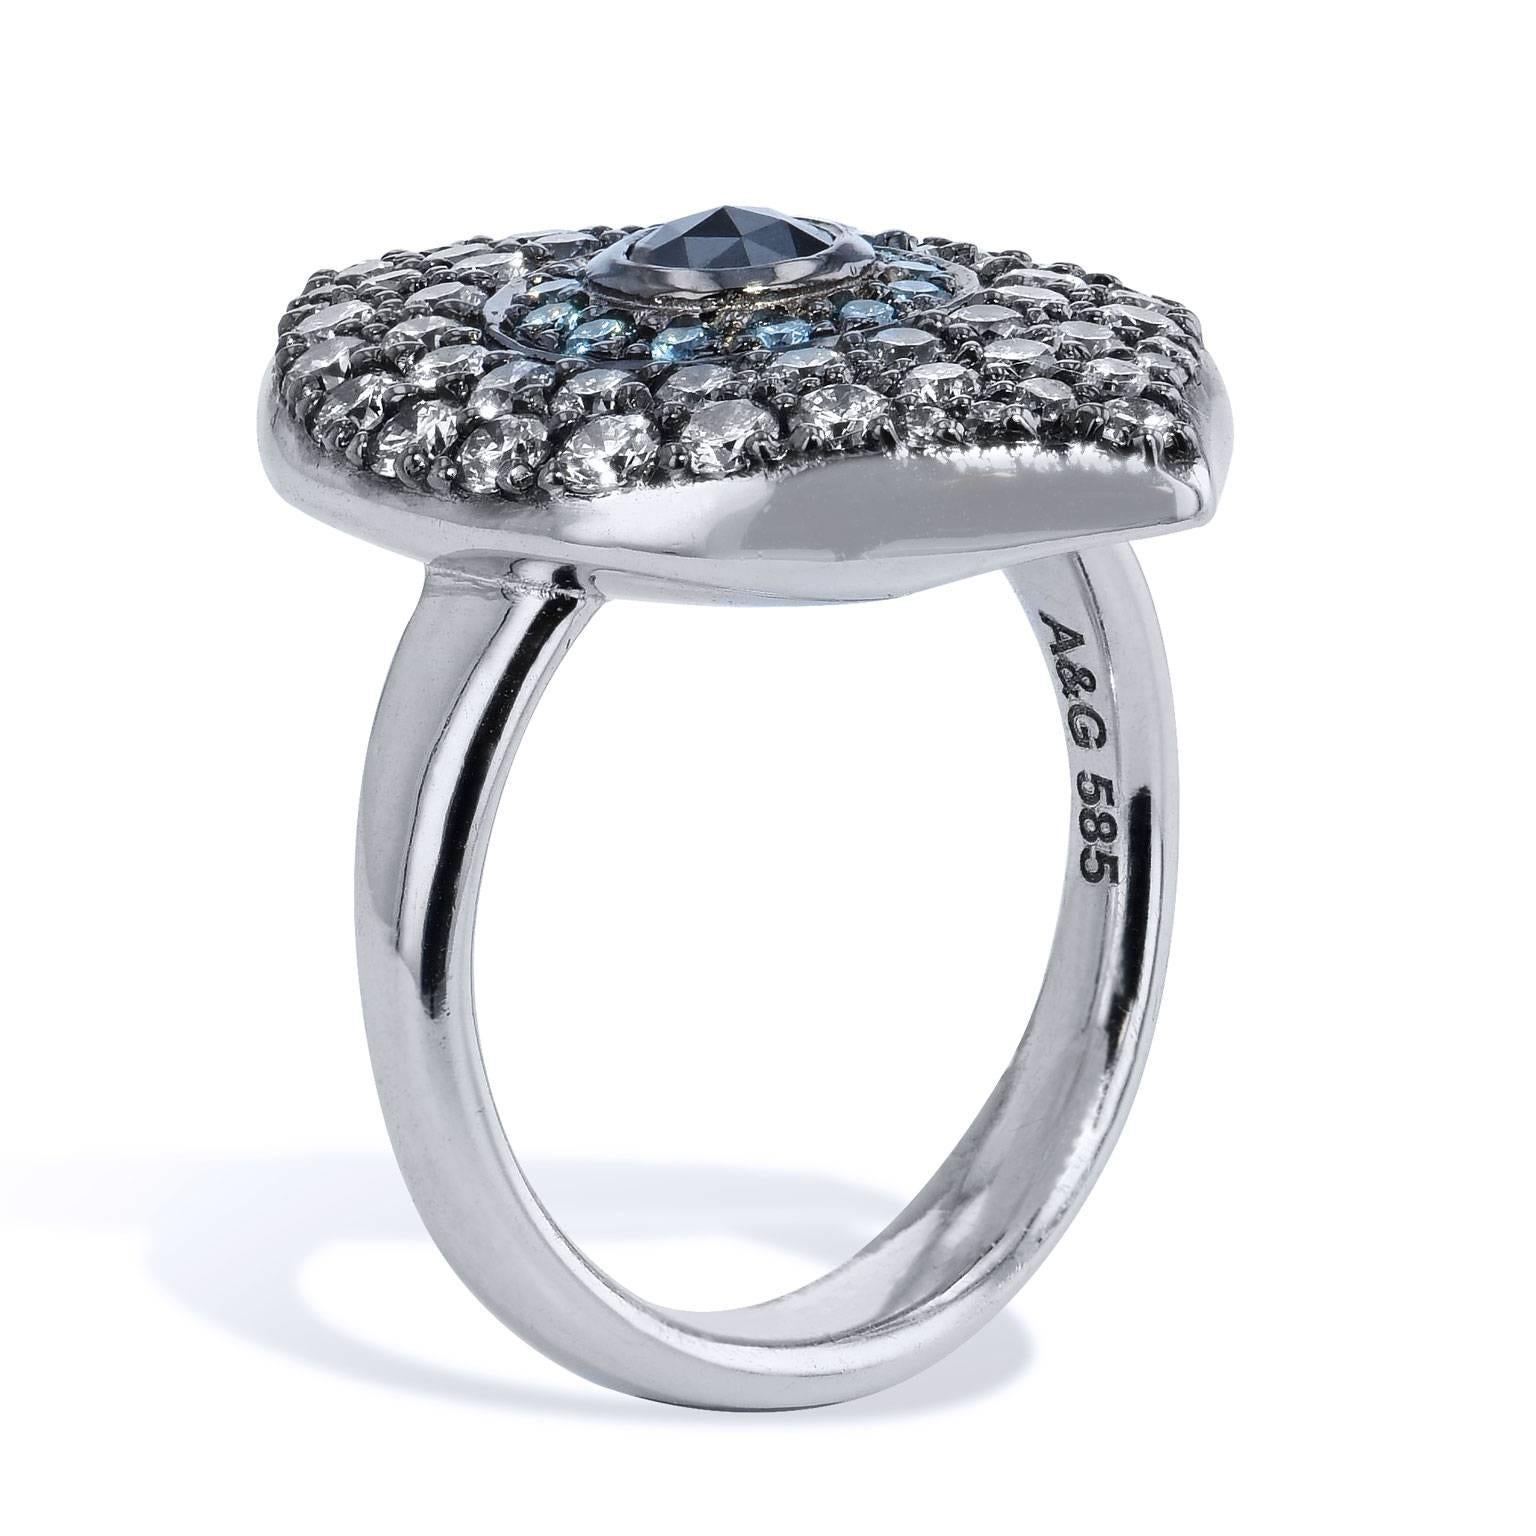 1.45 carat of pave-set diamond, affixed in 14 karat white gold and black rhodium-plated, come together to form the outline for this striking evil eye ring. 0.28 carat of black diamond is set at center and embraced by 0.19 carat of blue diamond,